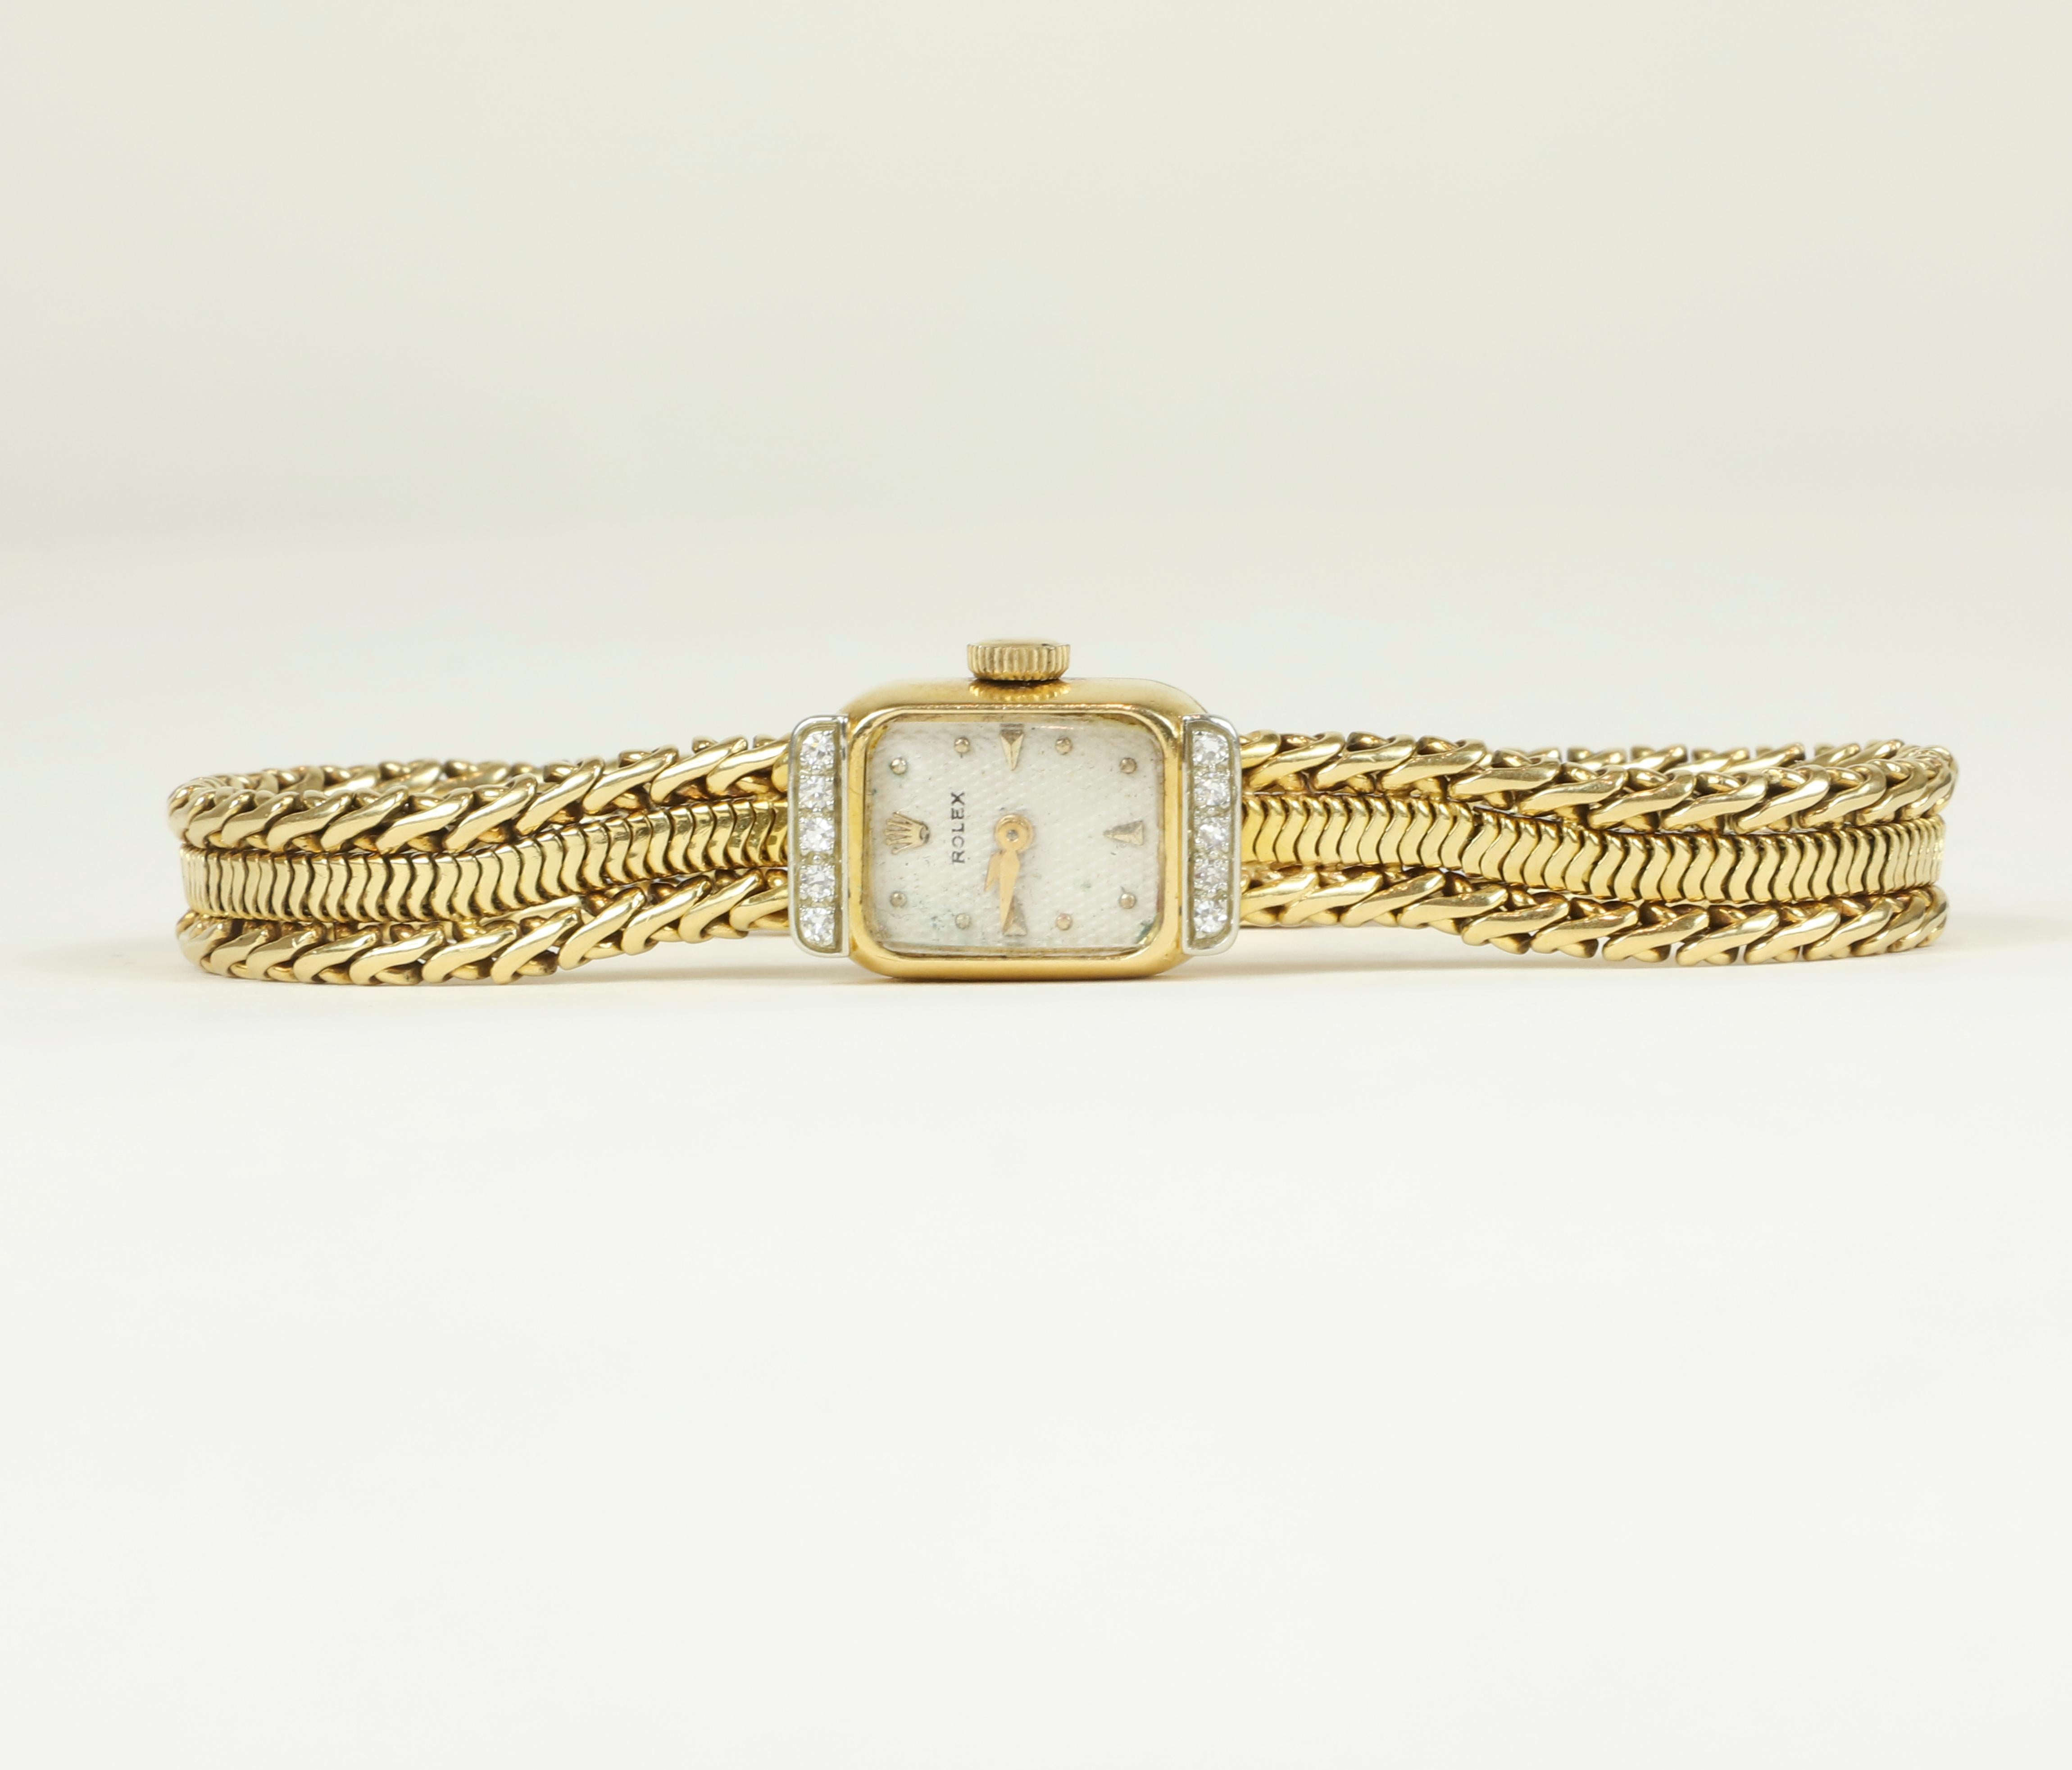 Vintage Rolex Diamond Detail
18K Gold
Exact time period is unknown.